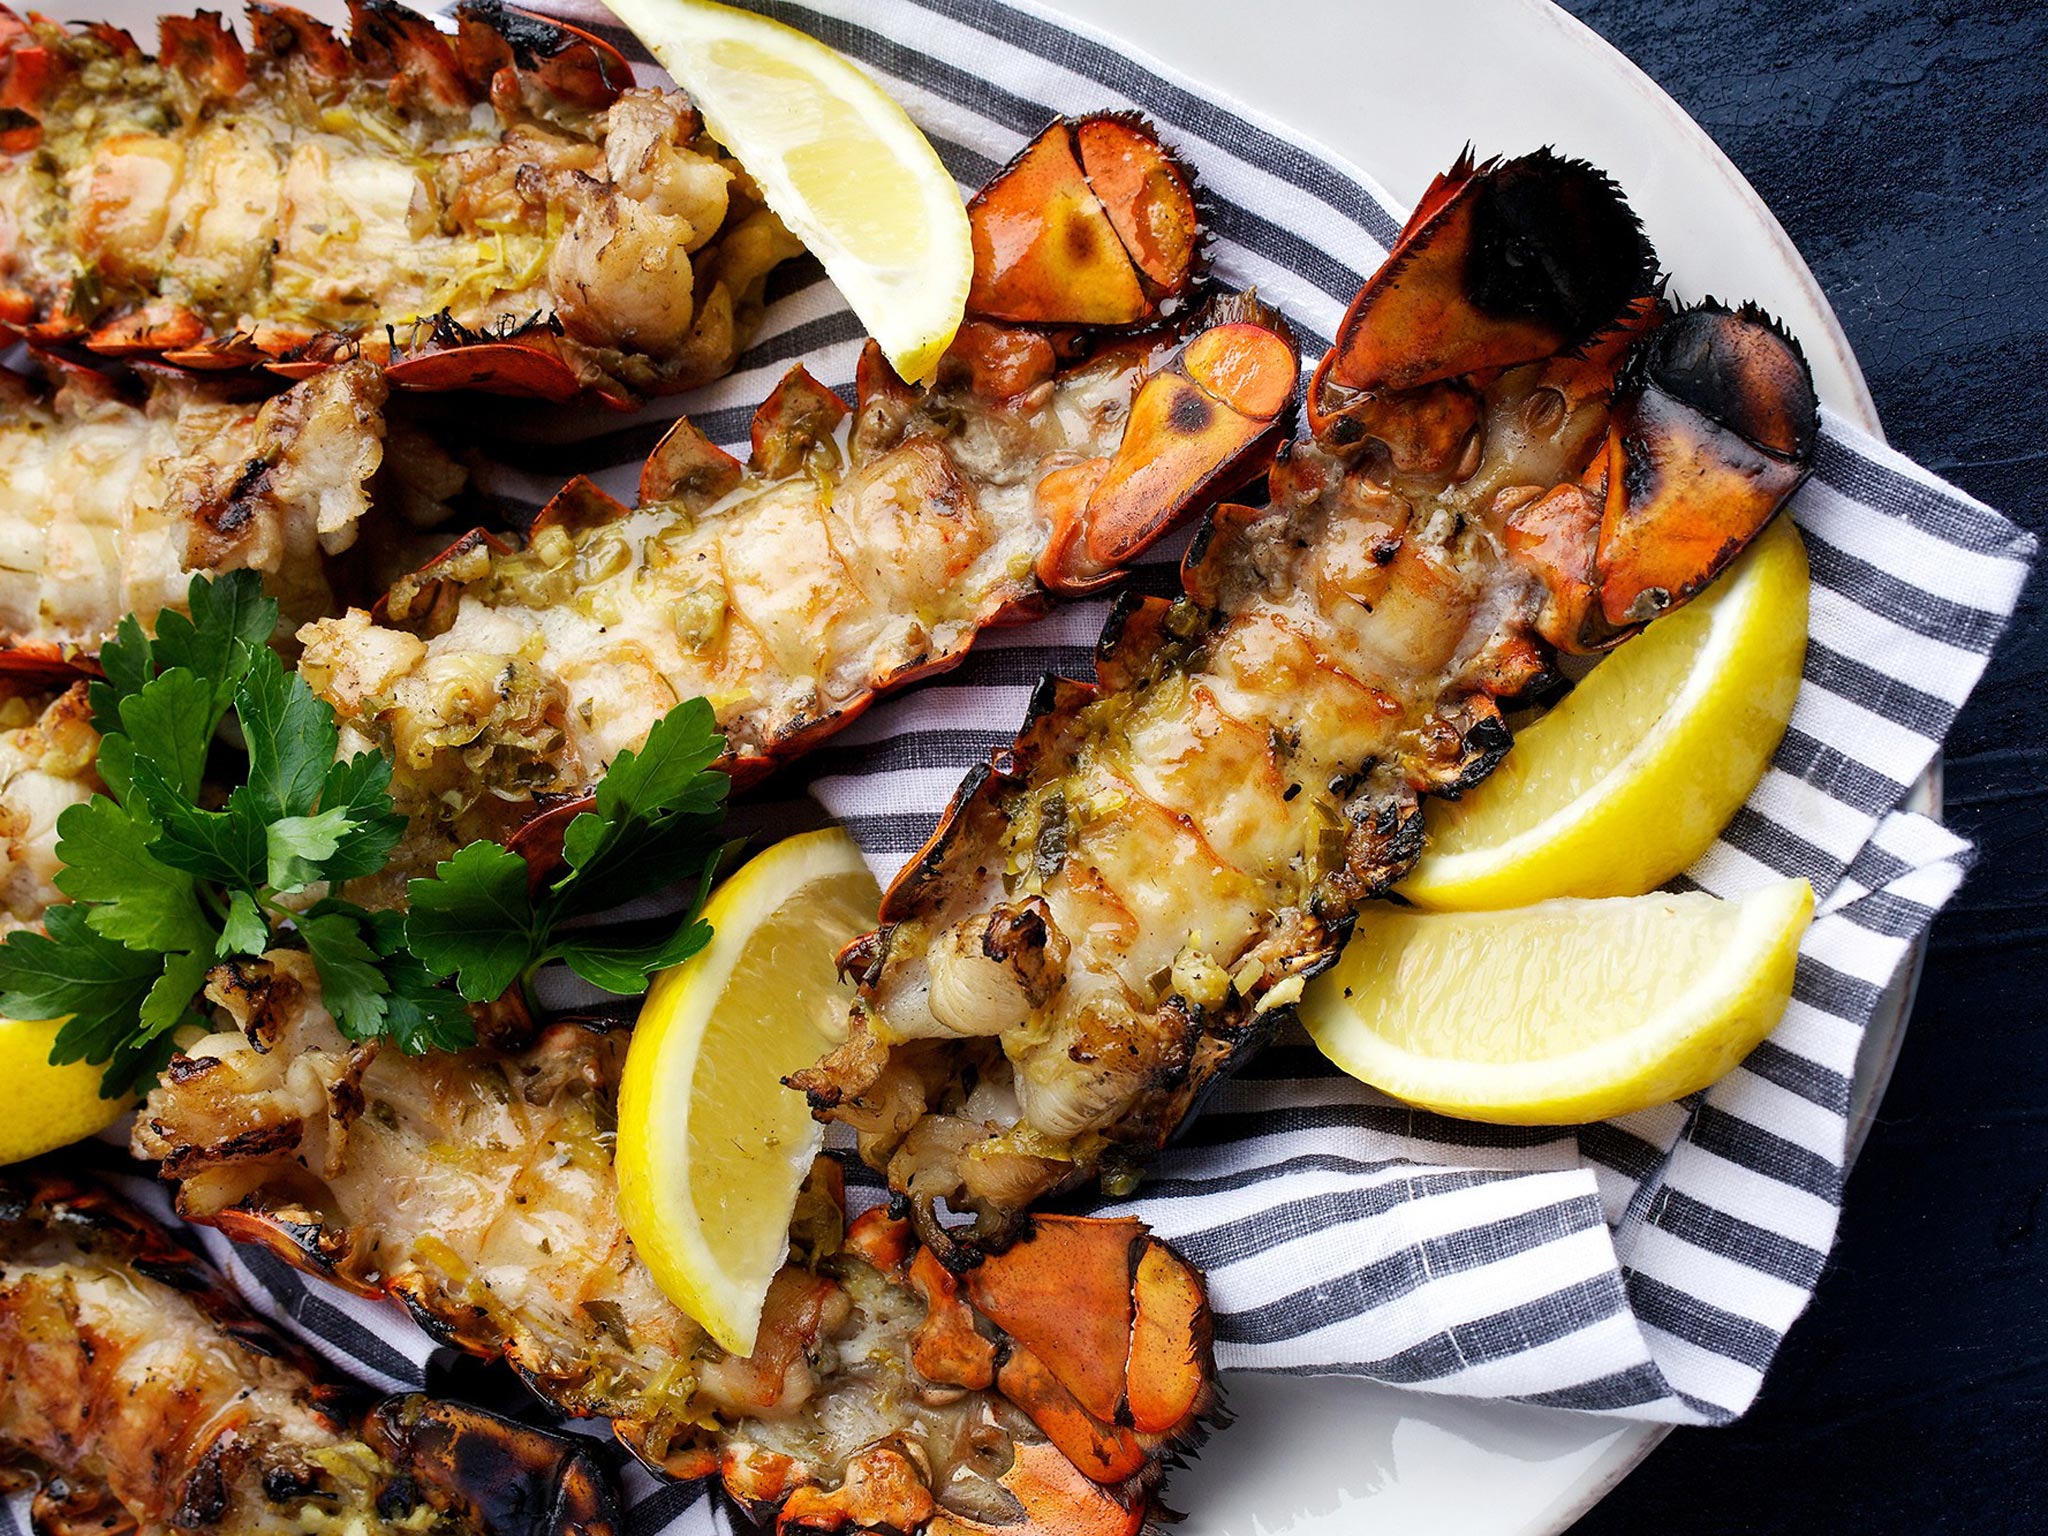 Full of flavour: Grilled lobster tails